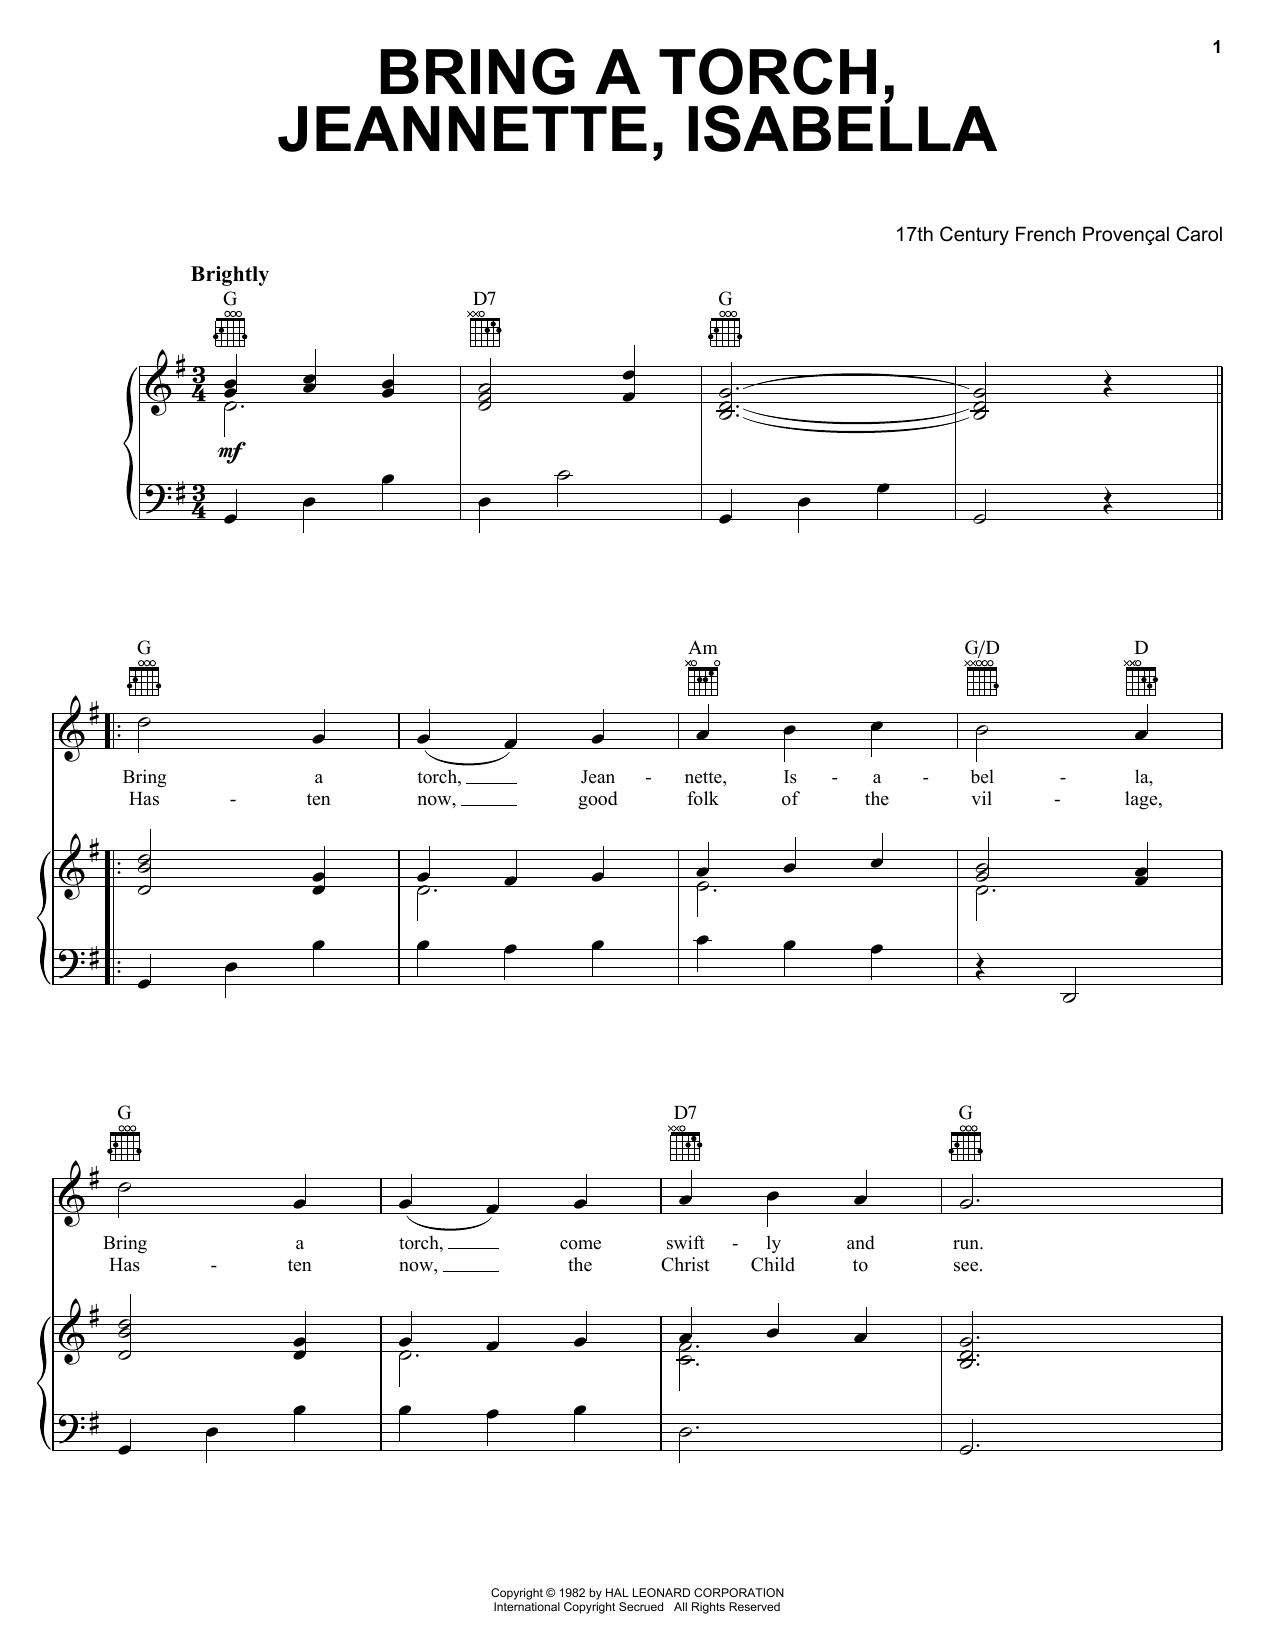 Traditional Carol Bring A Torch, Jeannette, Isabella sheet music notes and chords. Download Printable PDF.